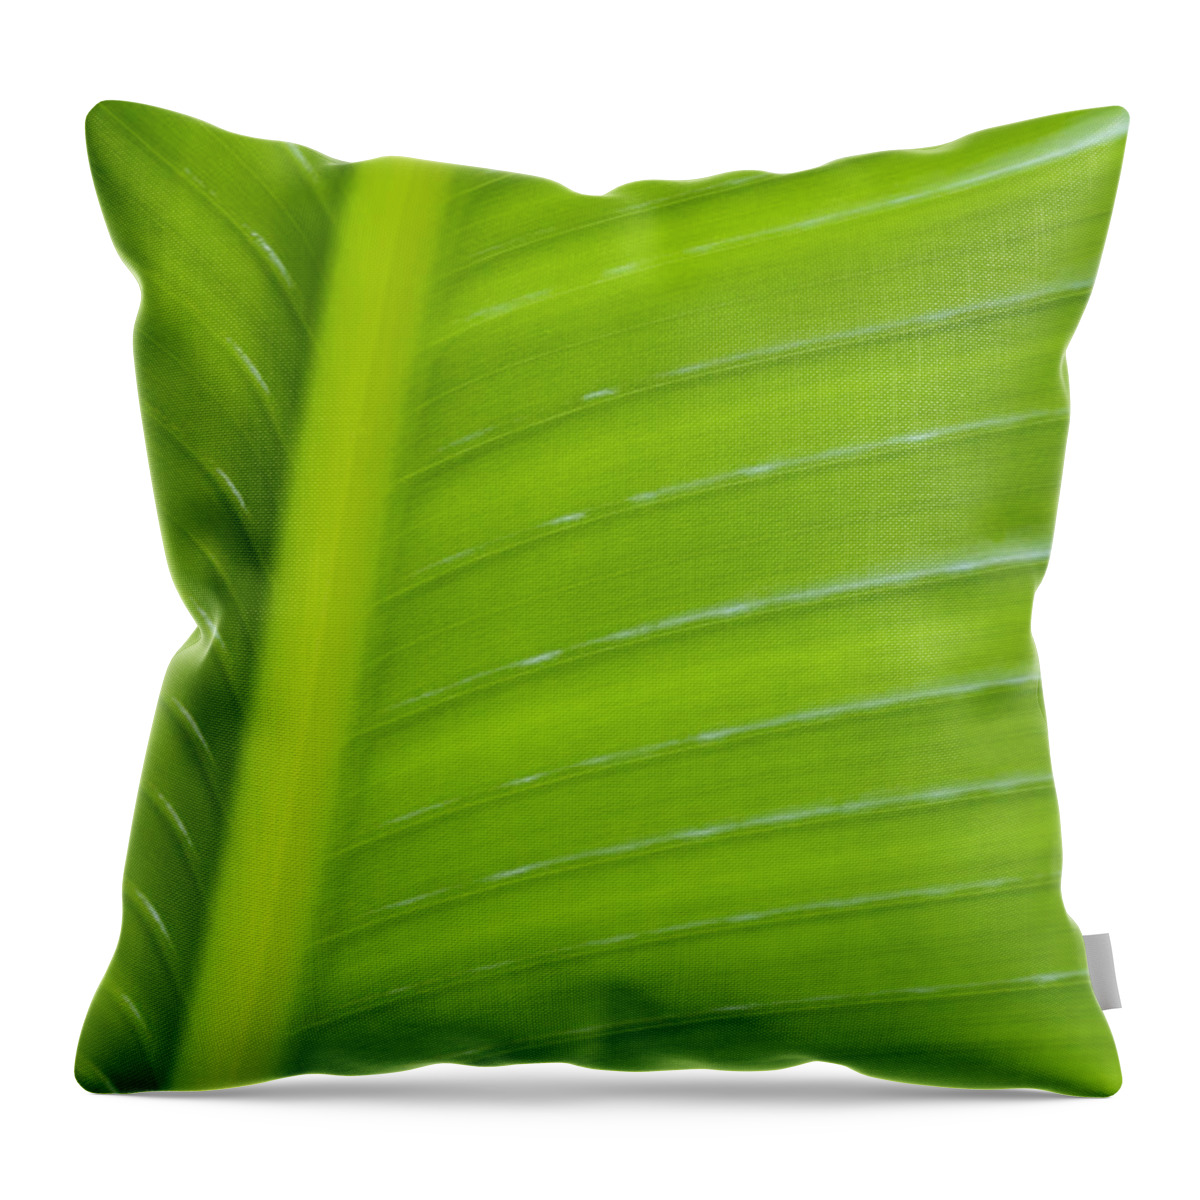 Abstract Throw Pillow featuring the photograph Palm Pattern by Joe Carini - Printscapes